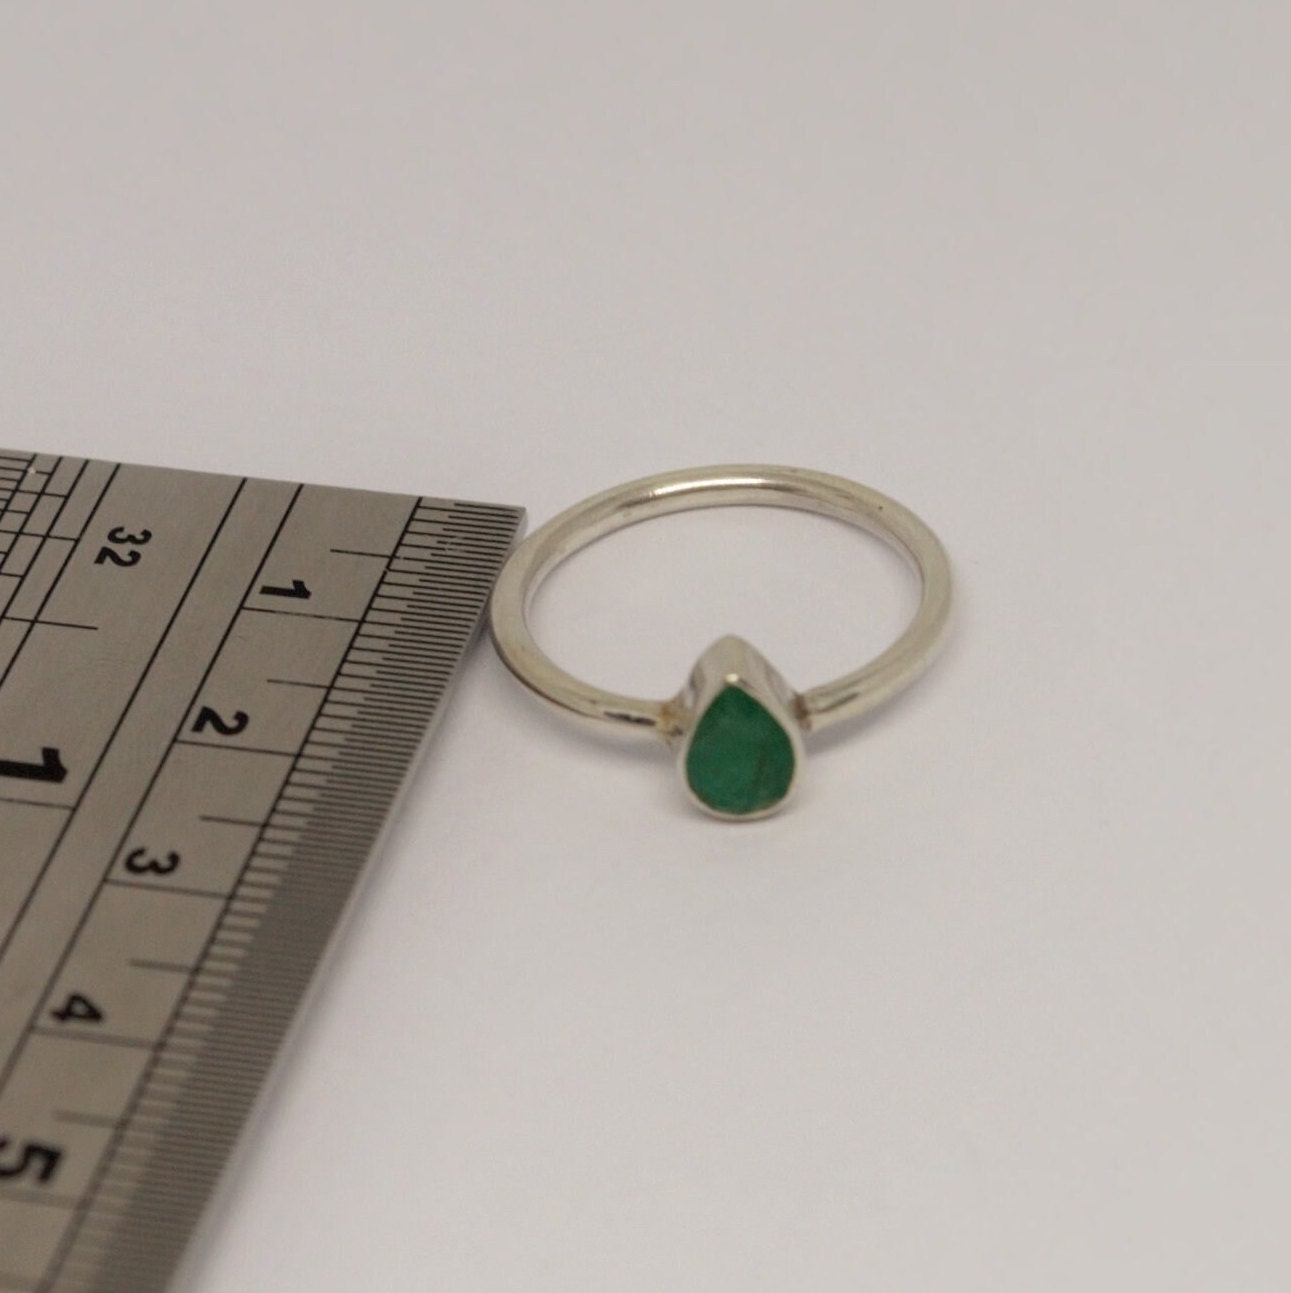 Emerald Ring, Green Dainty Silver Ring, Emerald Jewelry, Sterling Silver, May Birthstone, Rings for Women, Handmade Stacking Ring, Birthday